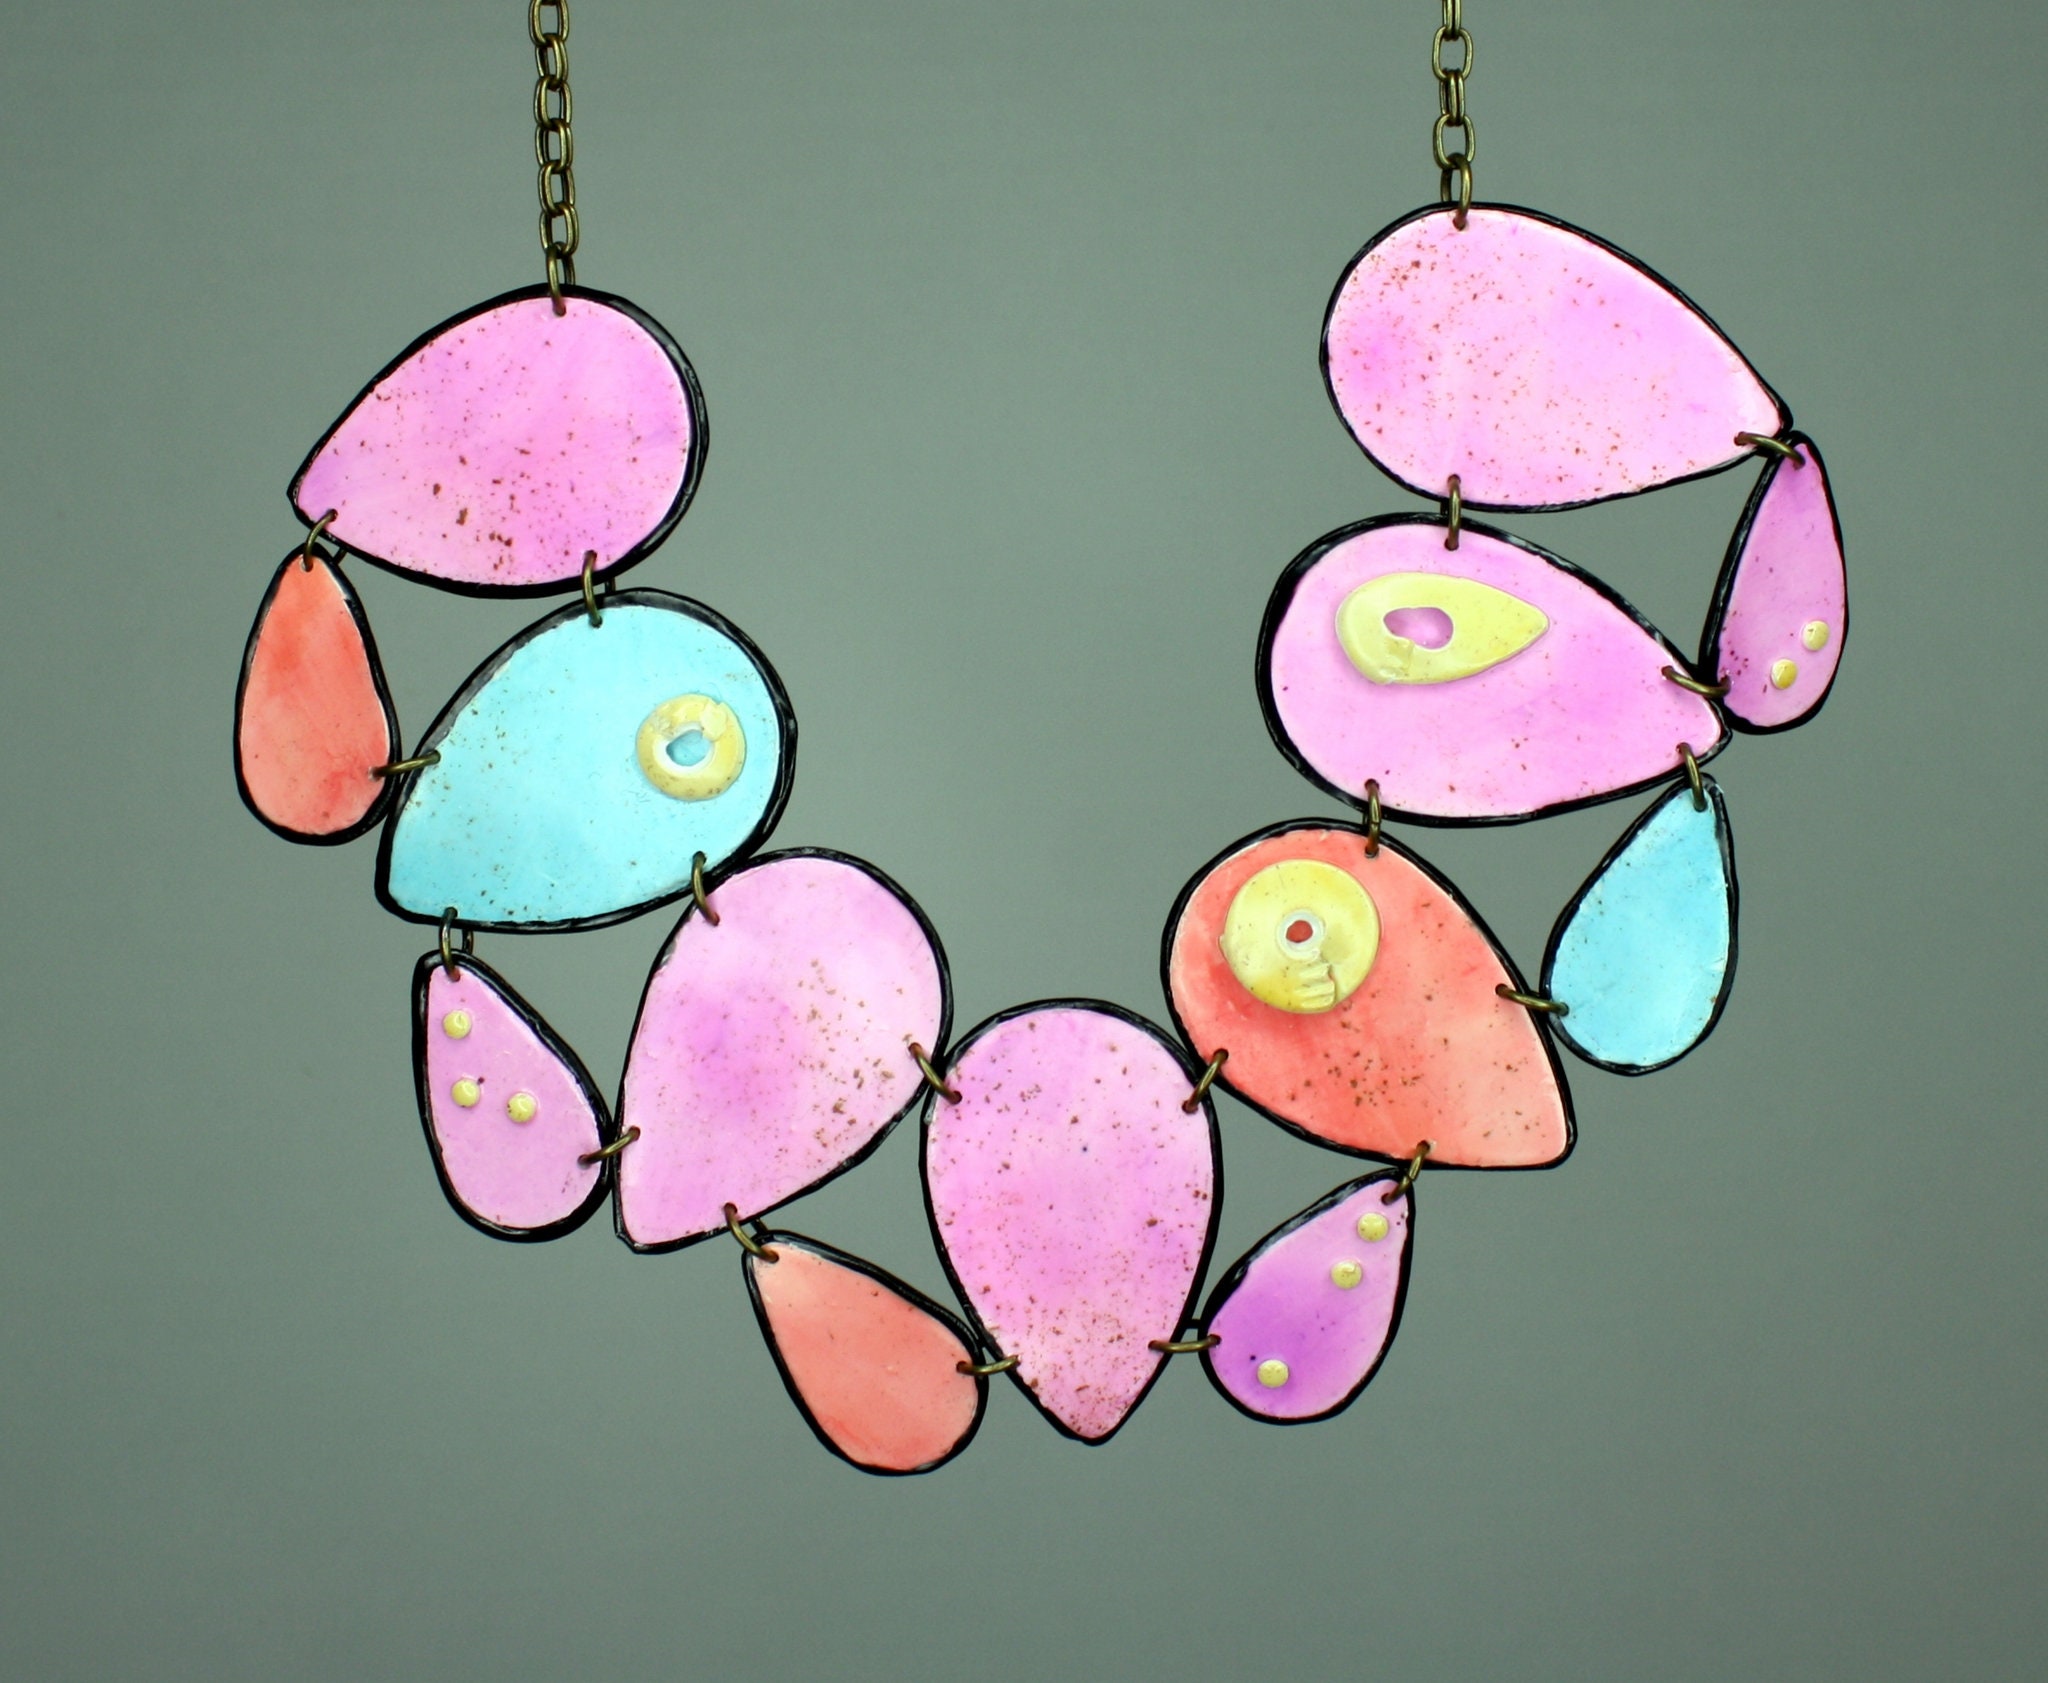 Make Your Own Colourful Polymer Clay Necklaces | Envato Tuts+